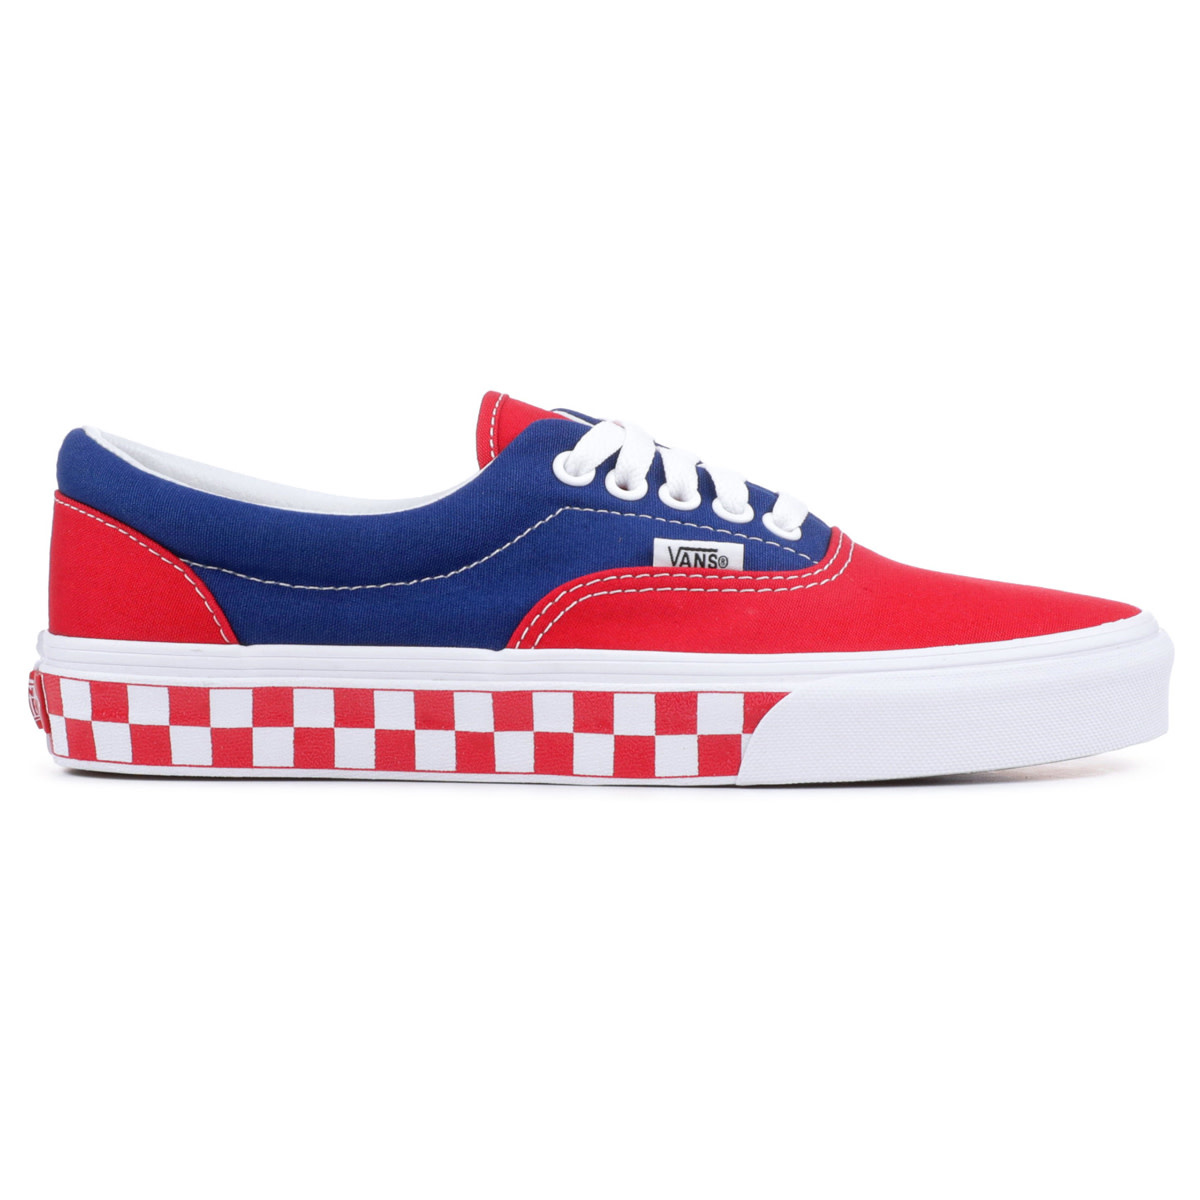 red vans checkered